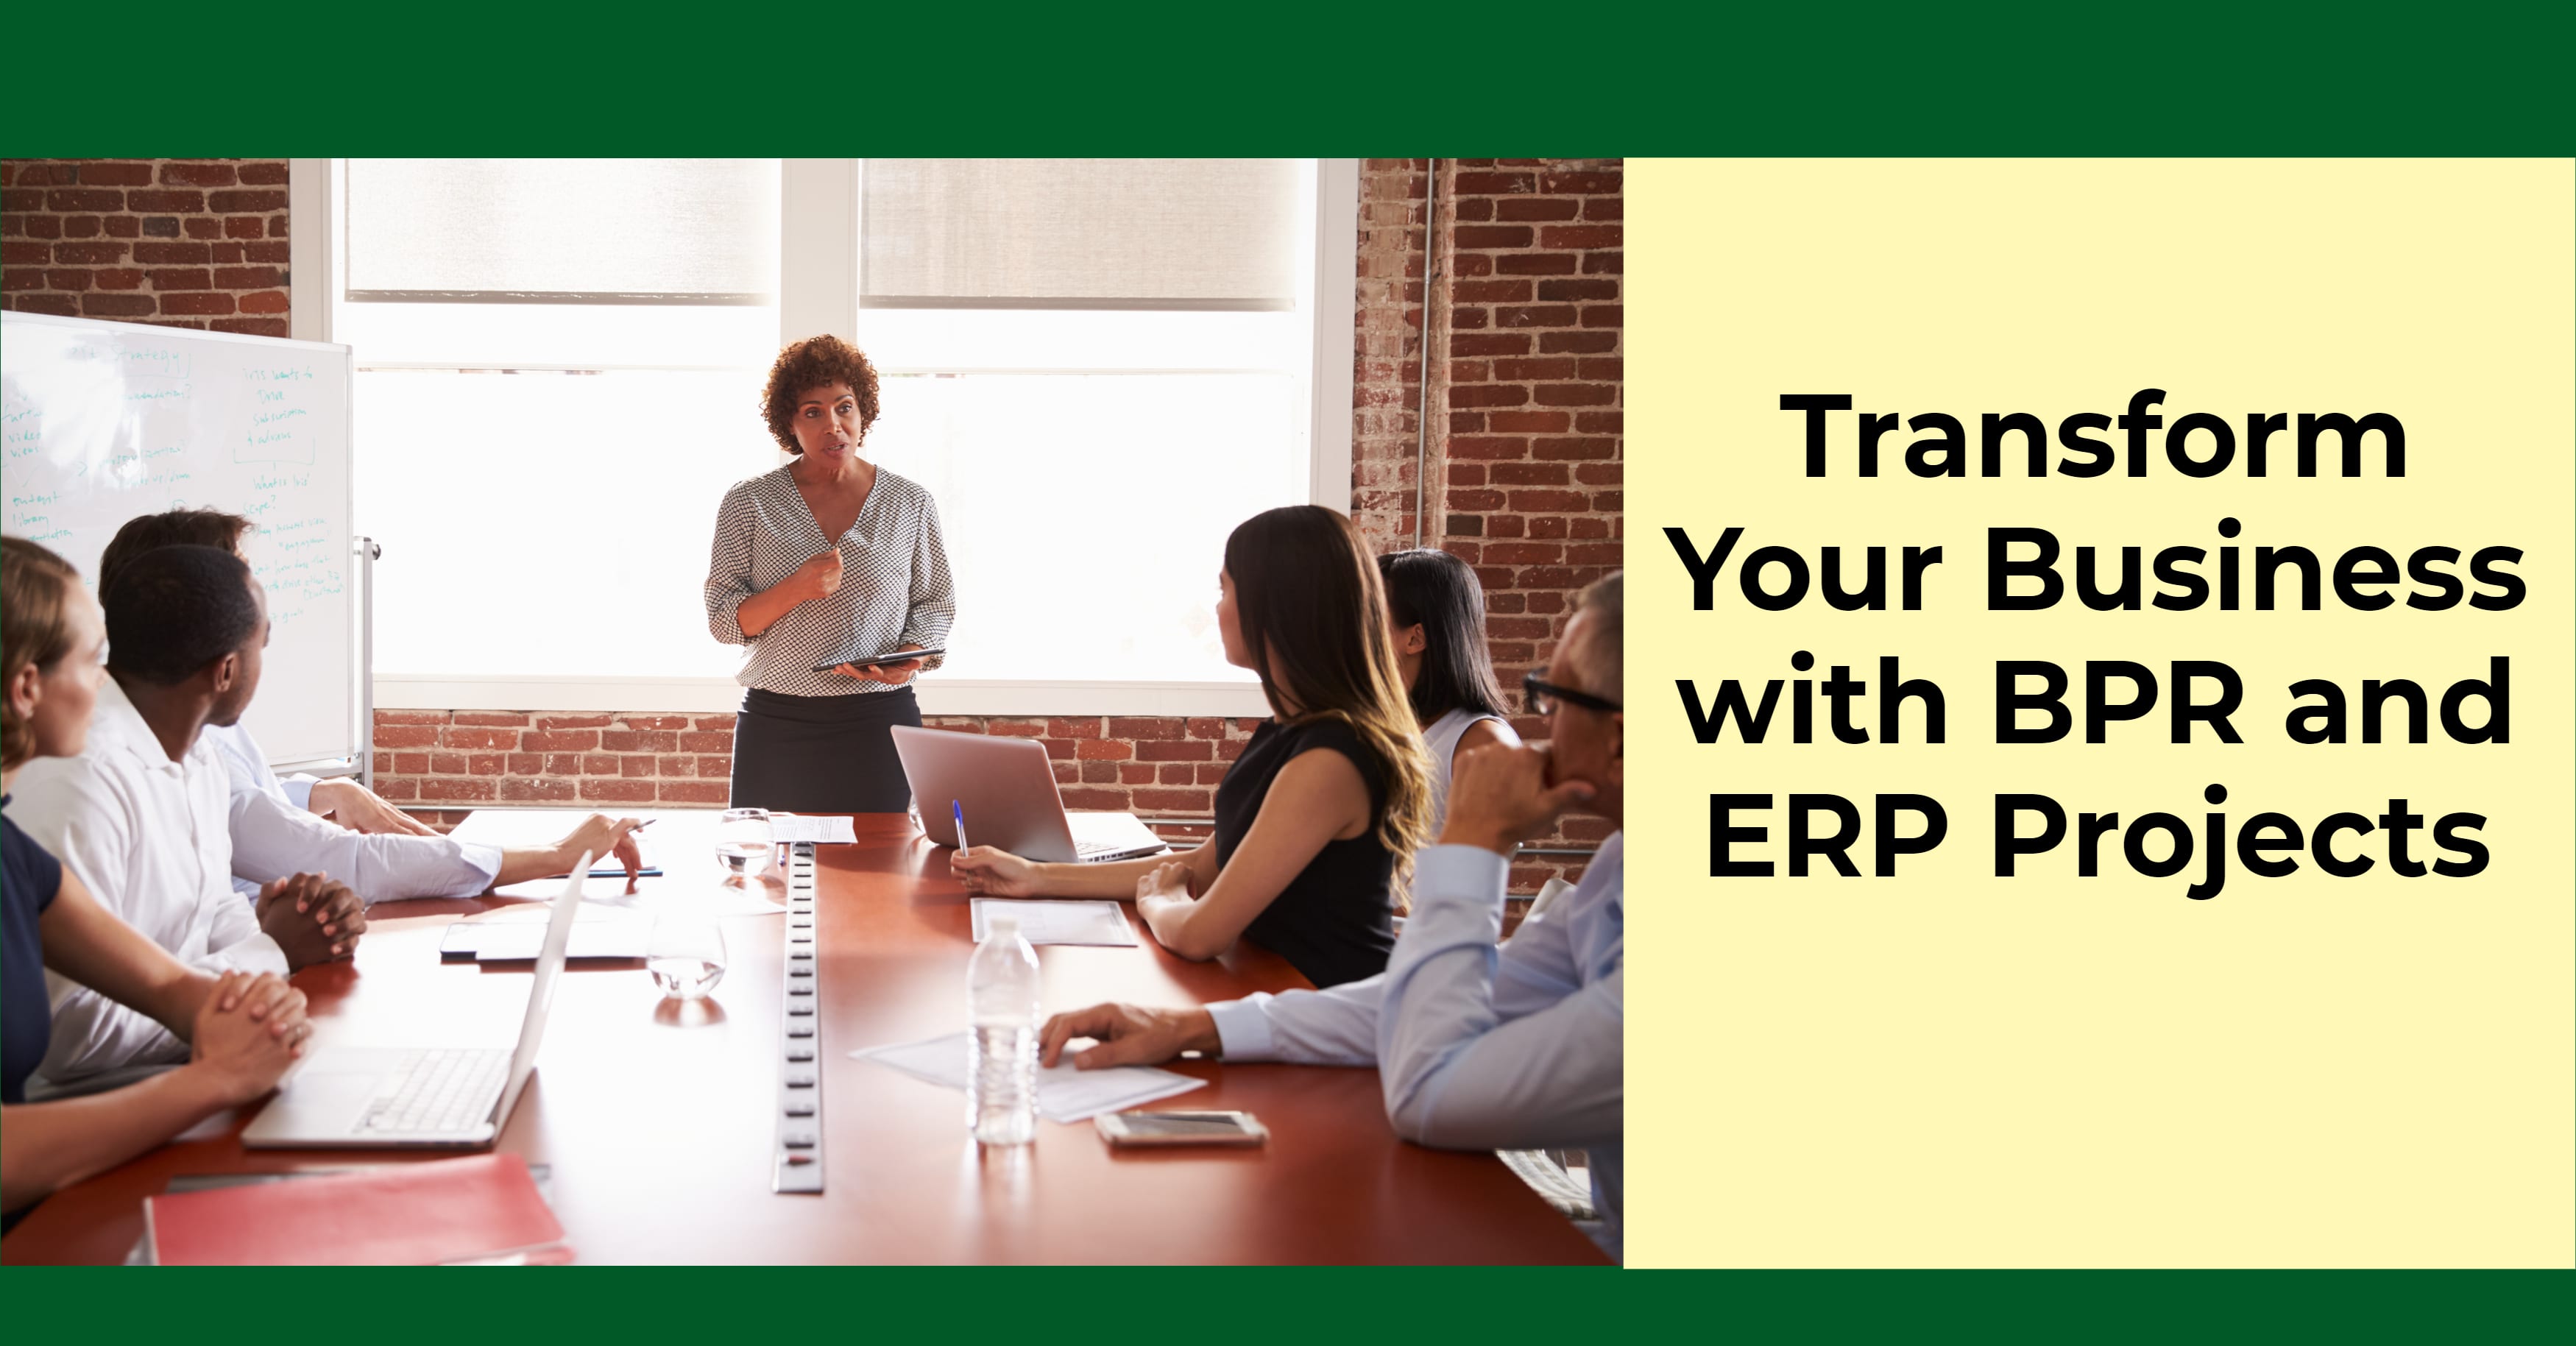 Transform Your Business with BPR and ERP Projects